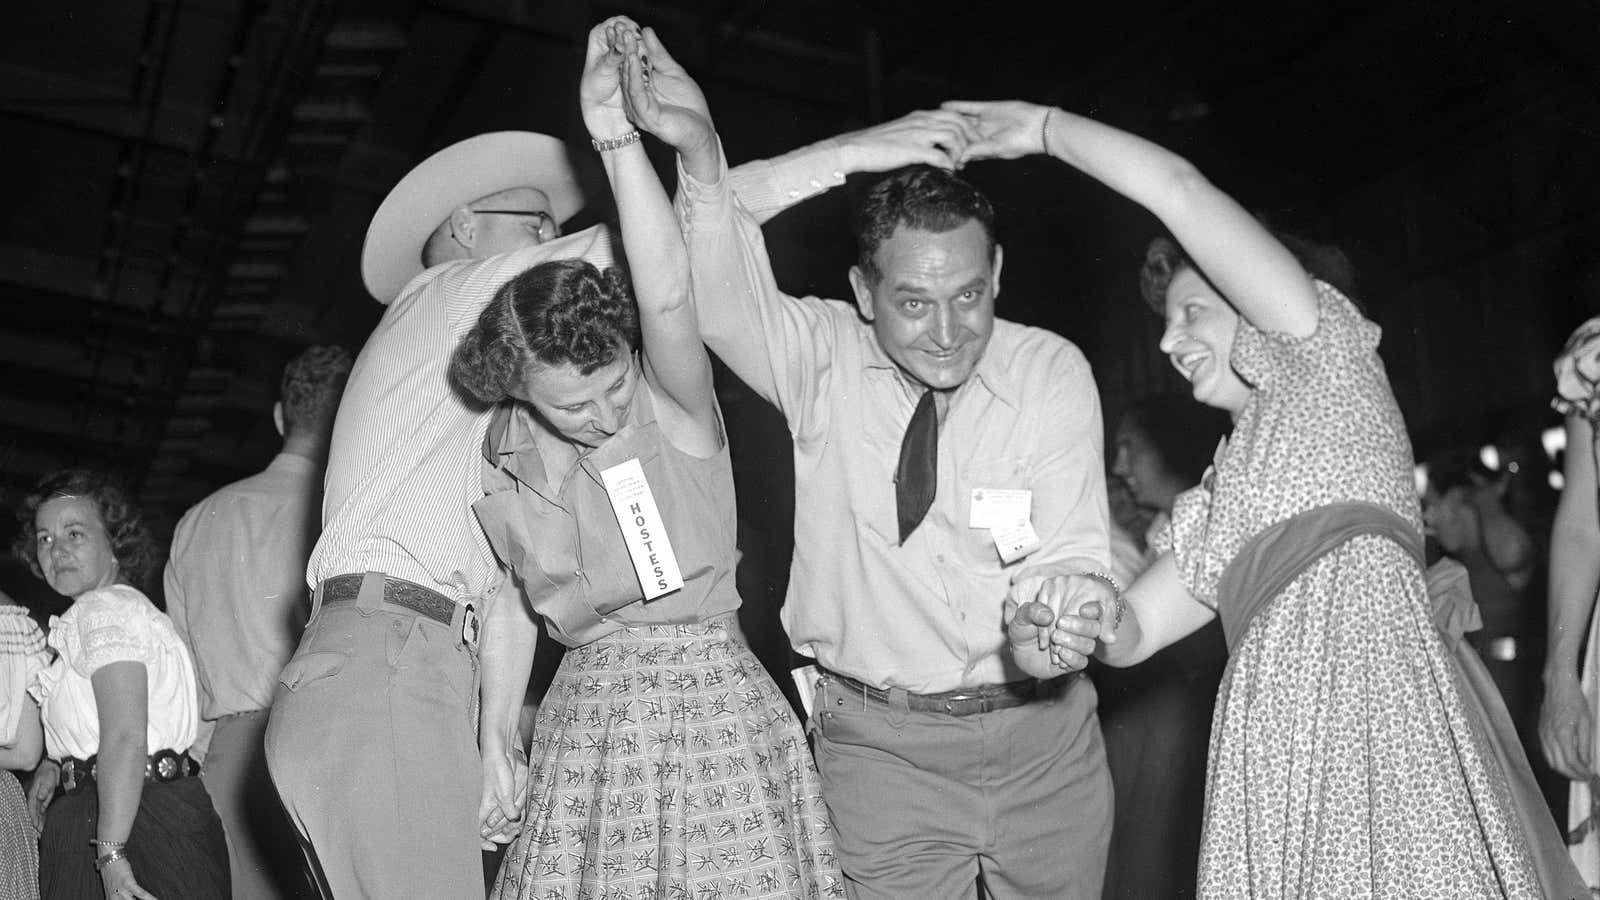 America's wholesome square dancing tradition is a tool of white supremacy